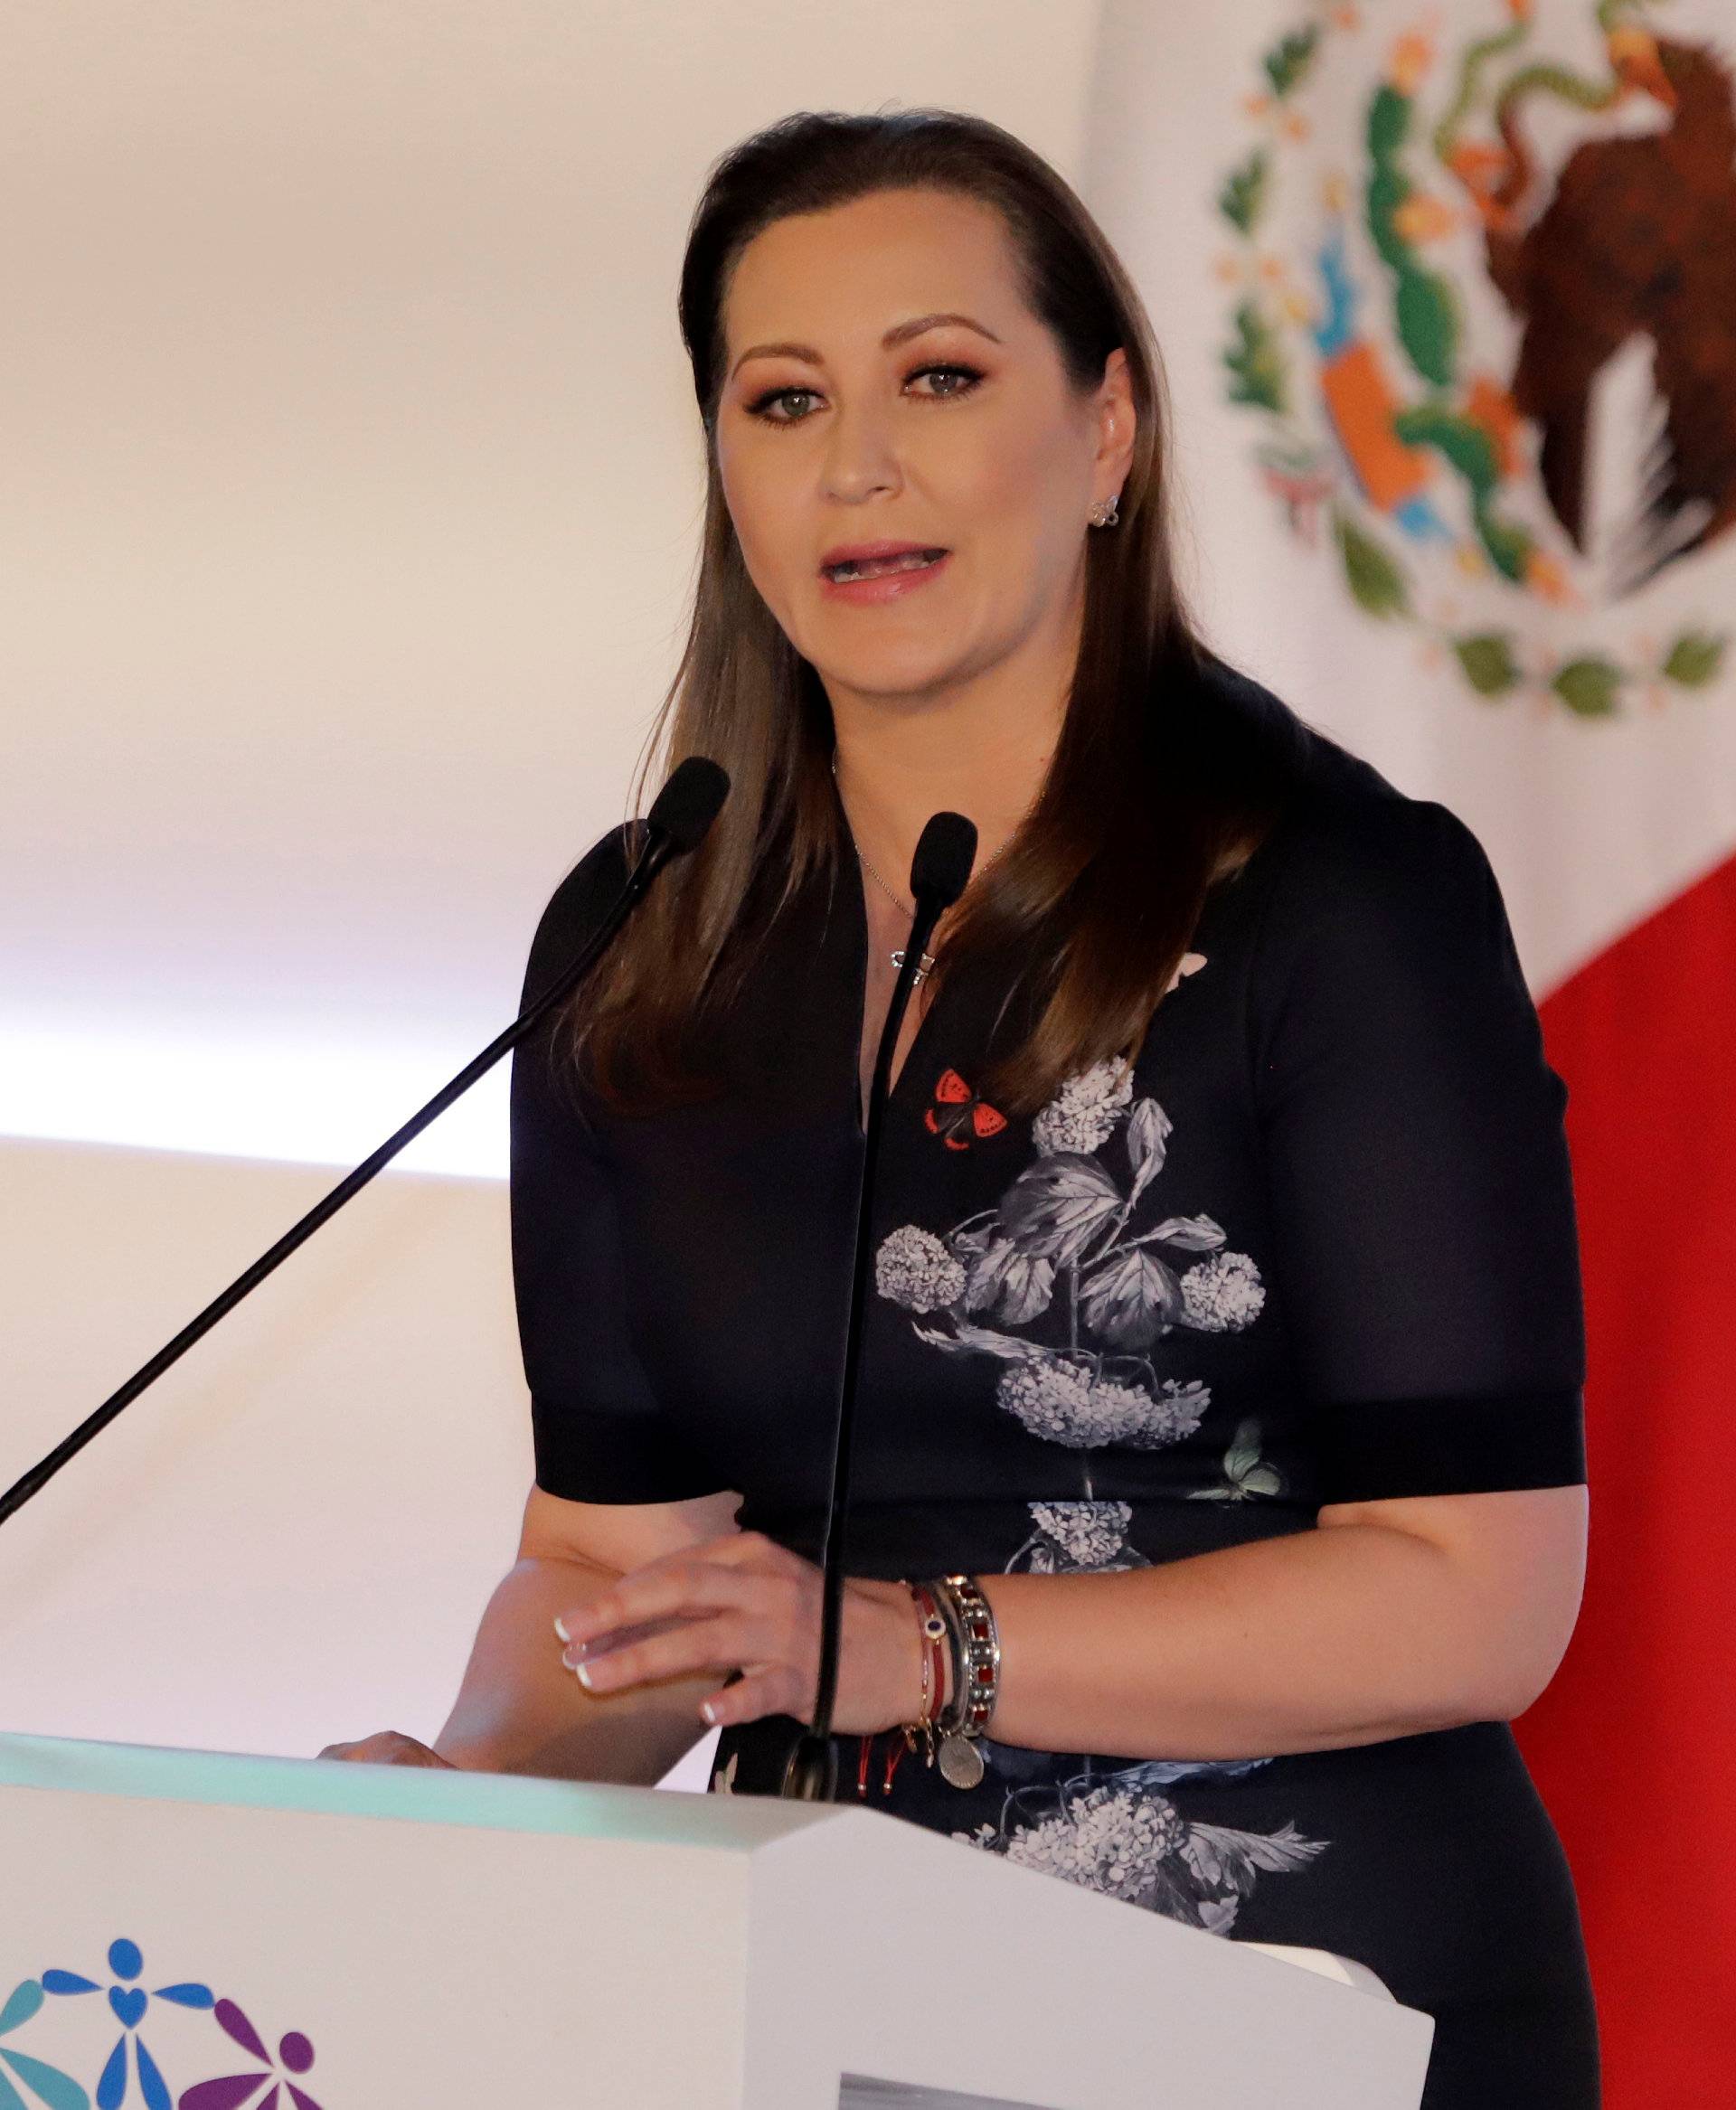 Martha Erika Alonso, governor of the state of Puebla, delivers a speech during her swearing-in ceremony in Puebla